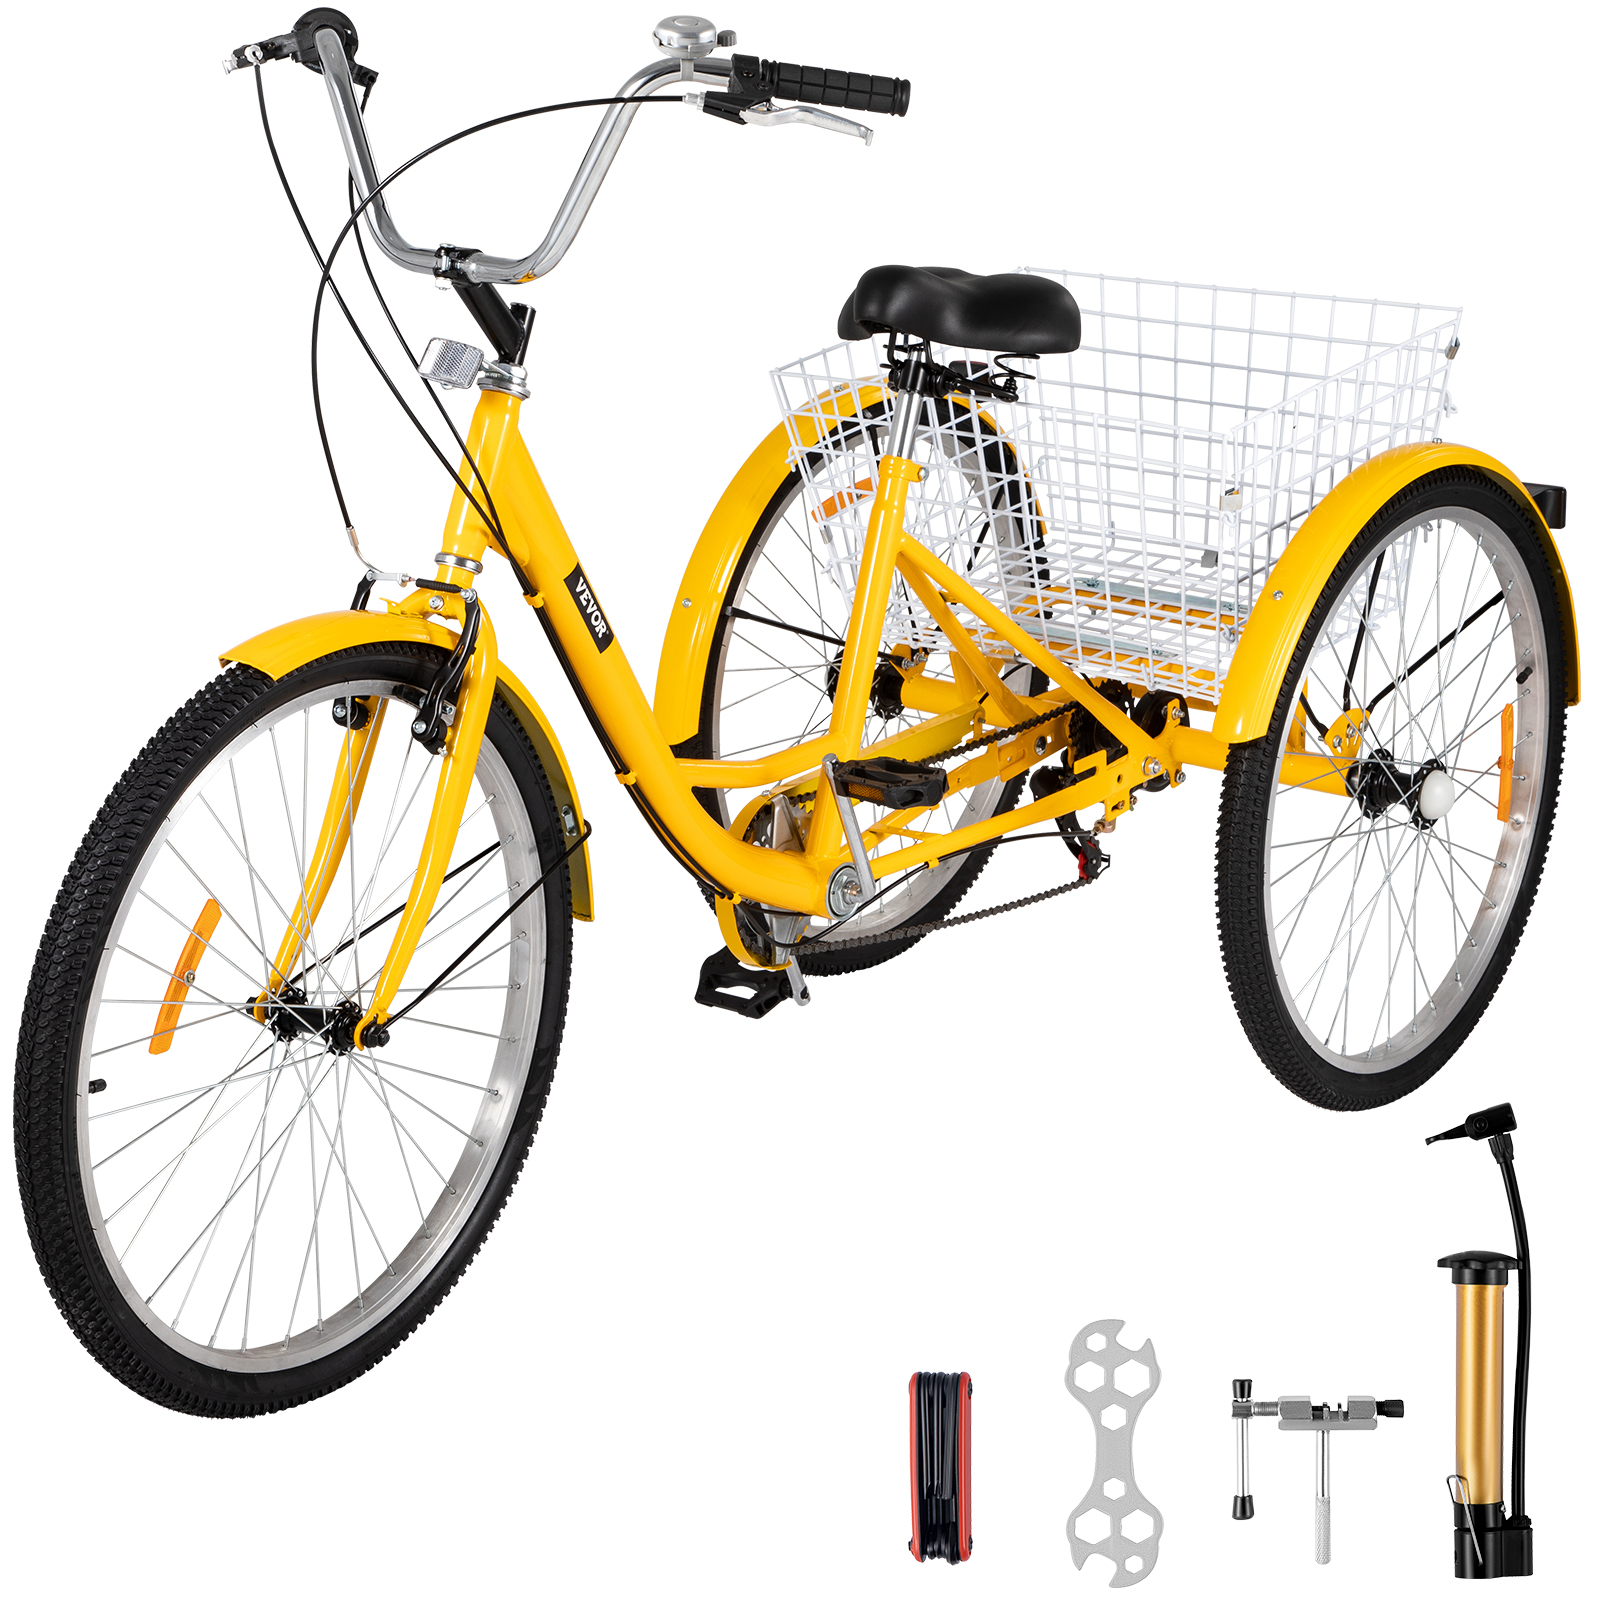 Adult Tricycle 20" 7-Speed 3-Wheel Bike W/ Basket Installation Tools Shooping от Vevor Many GEOs